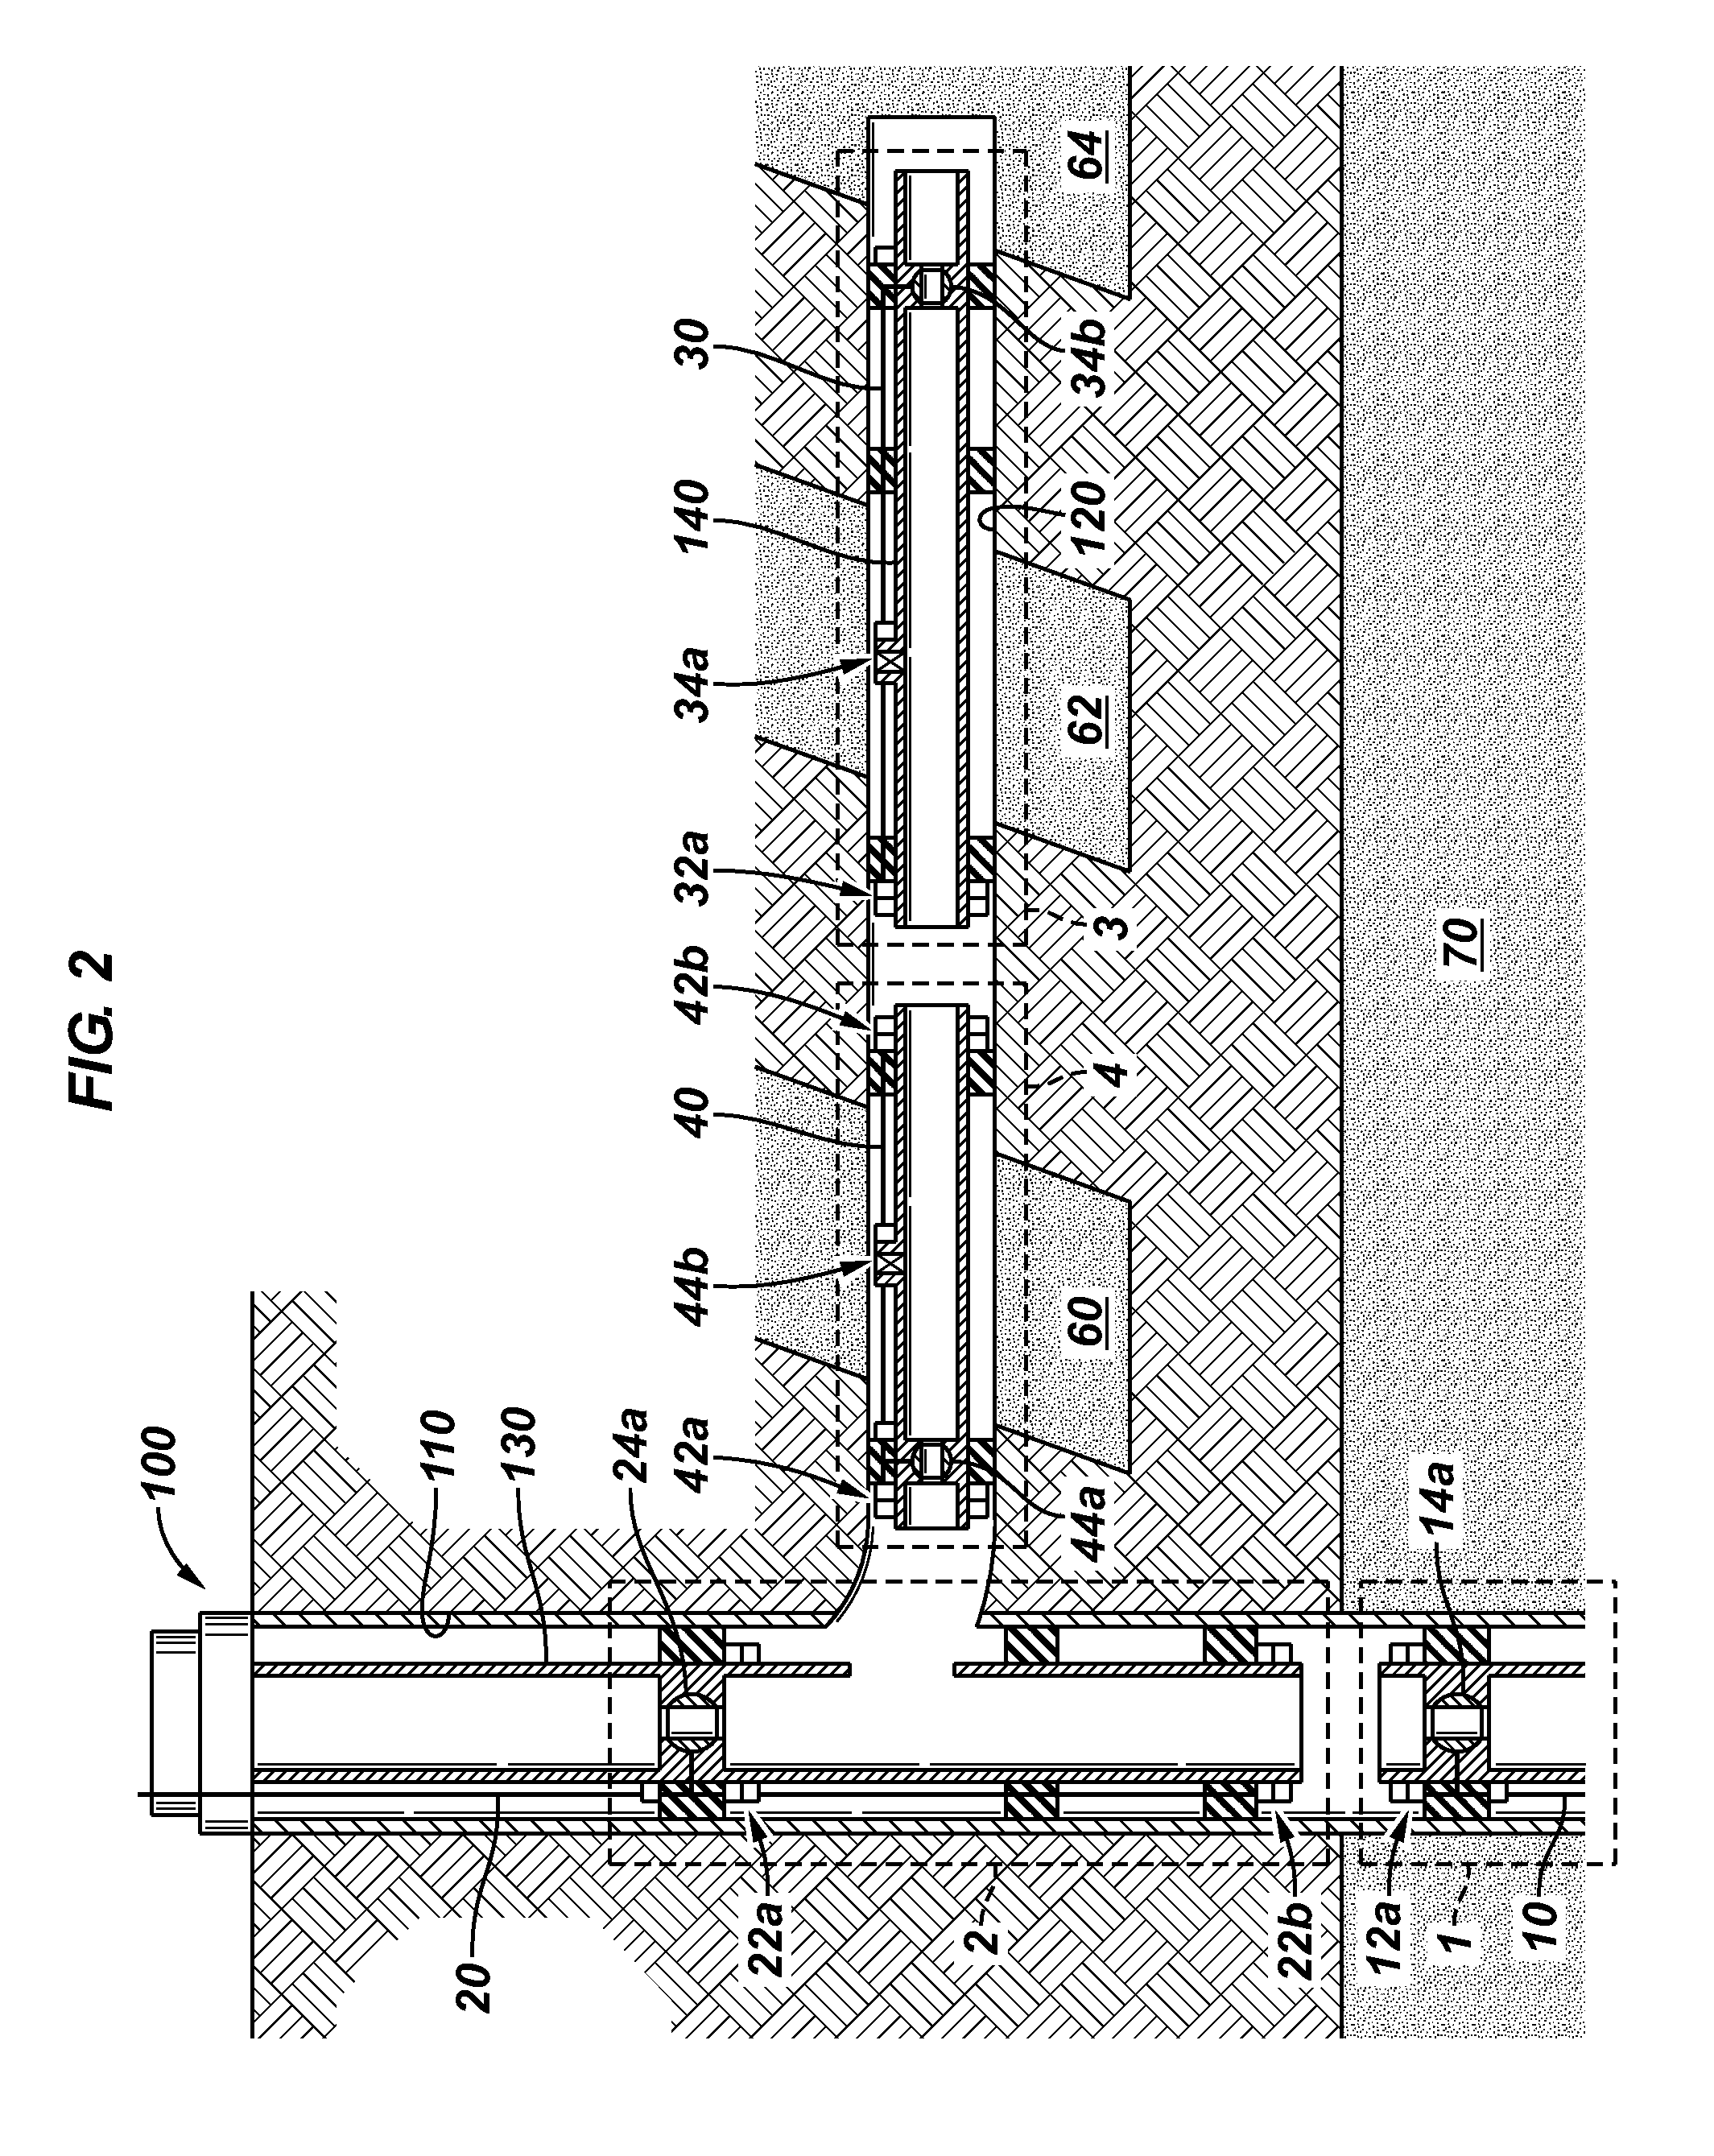 Wireless power and telemetry transmission between connections of well completions